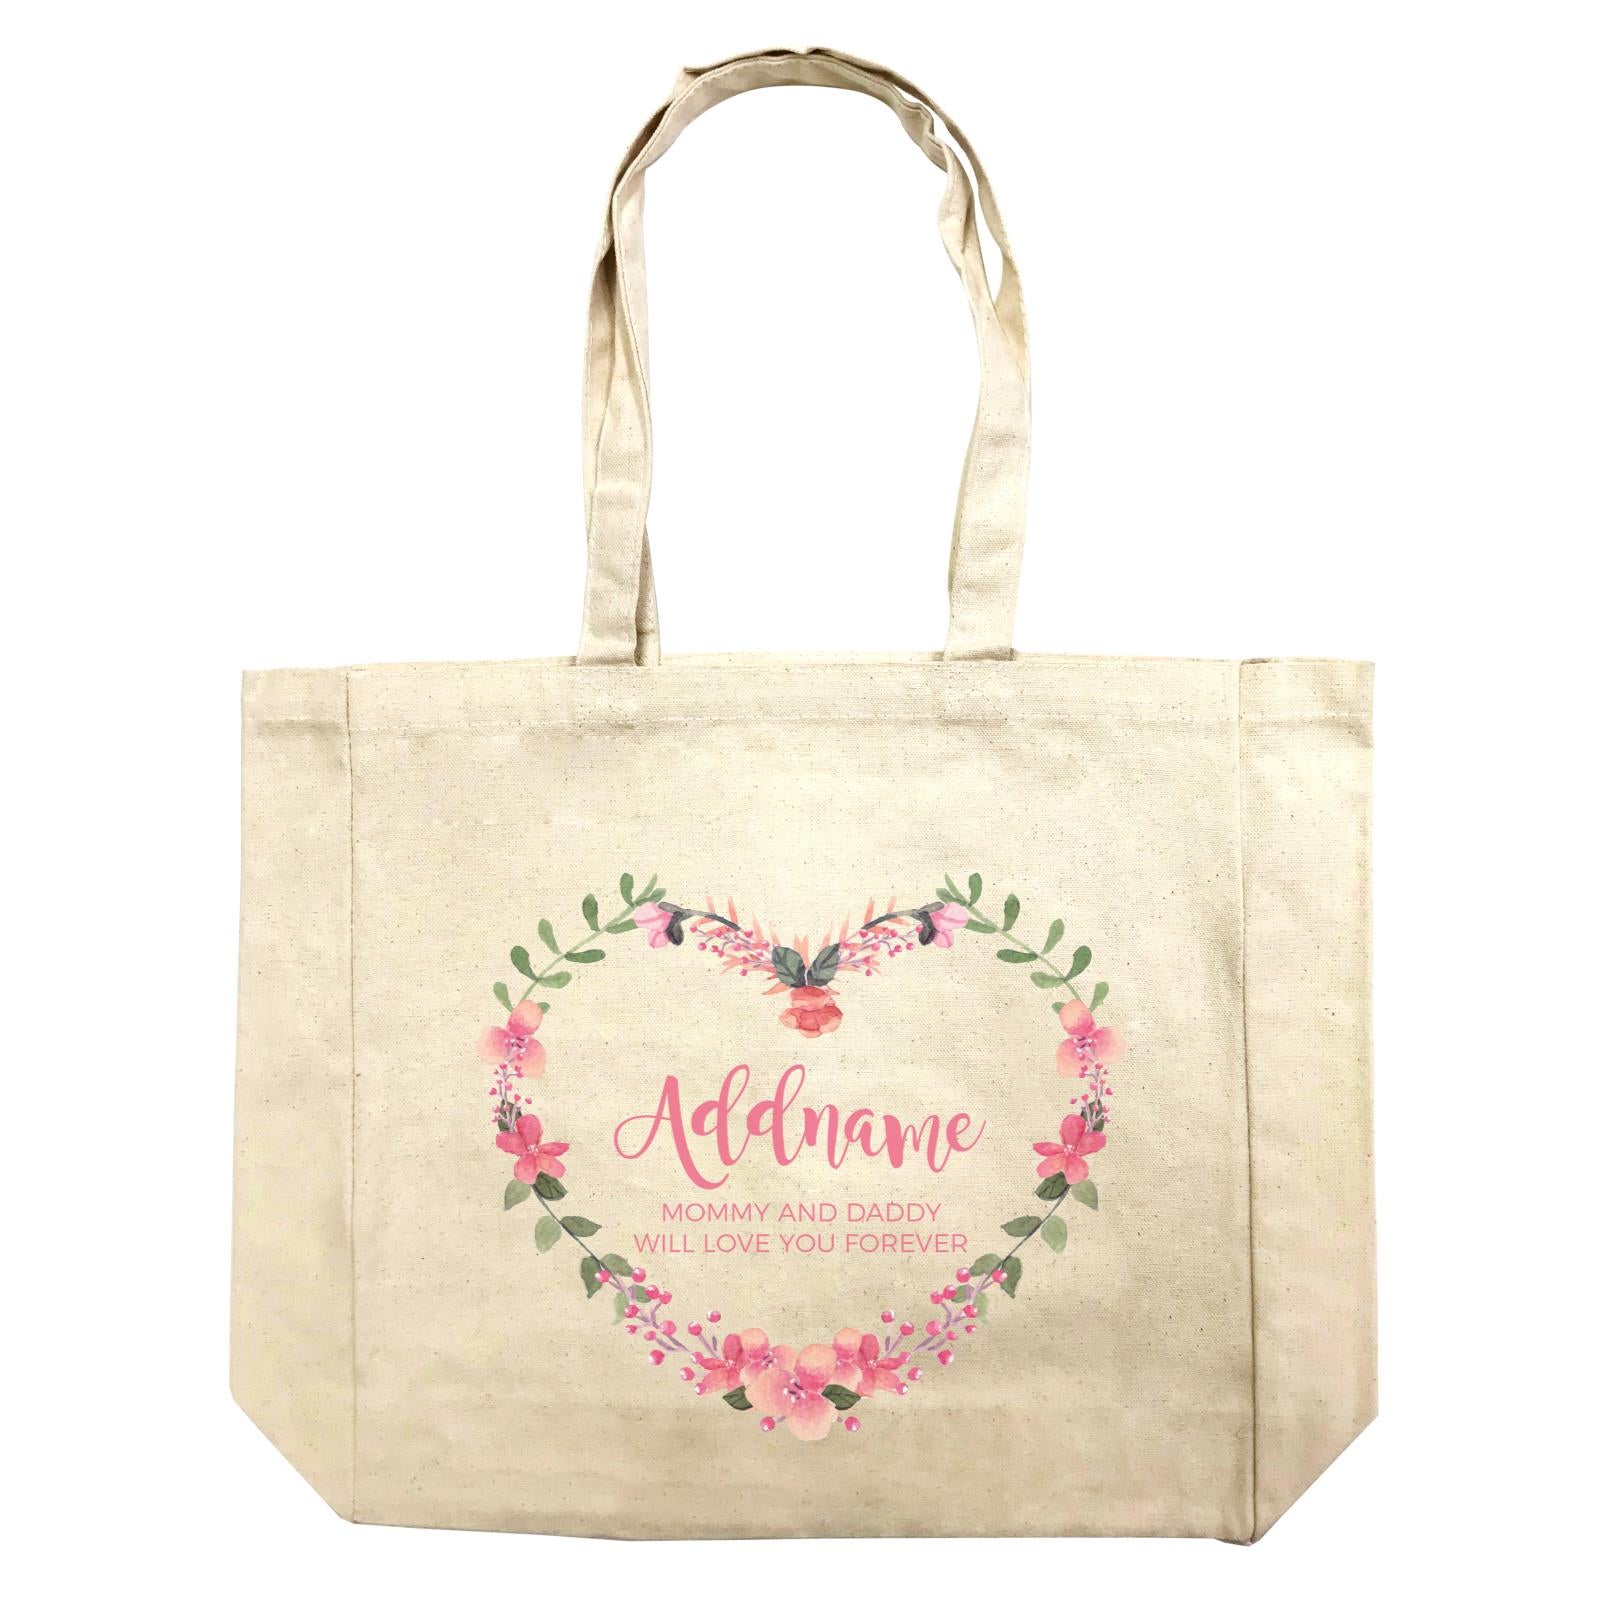 Pink Heart Shaped Flower Wreath Personalizable with Name and Text Shopping Bag